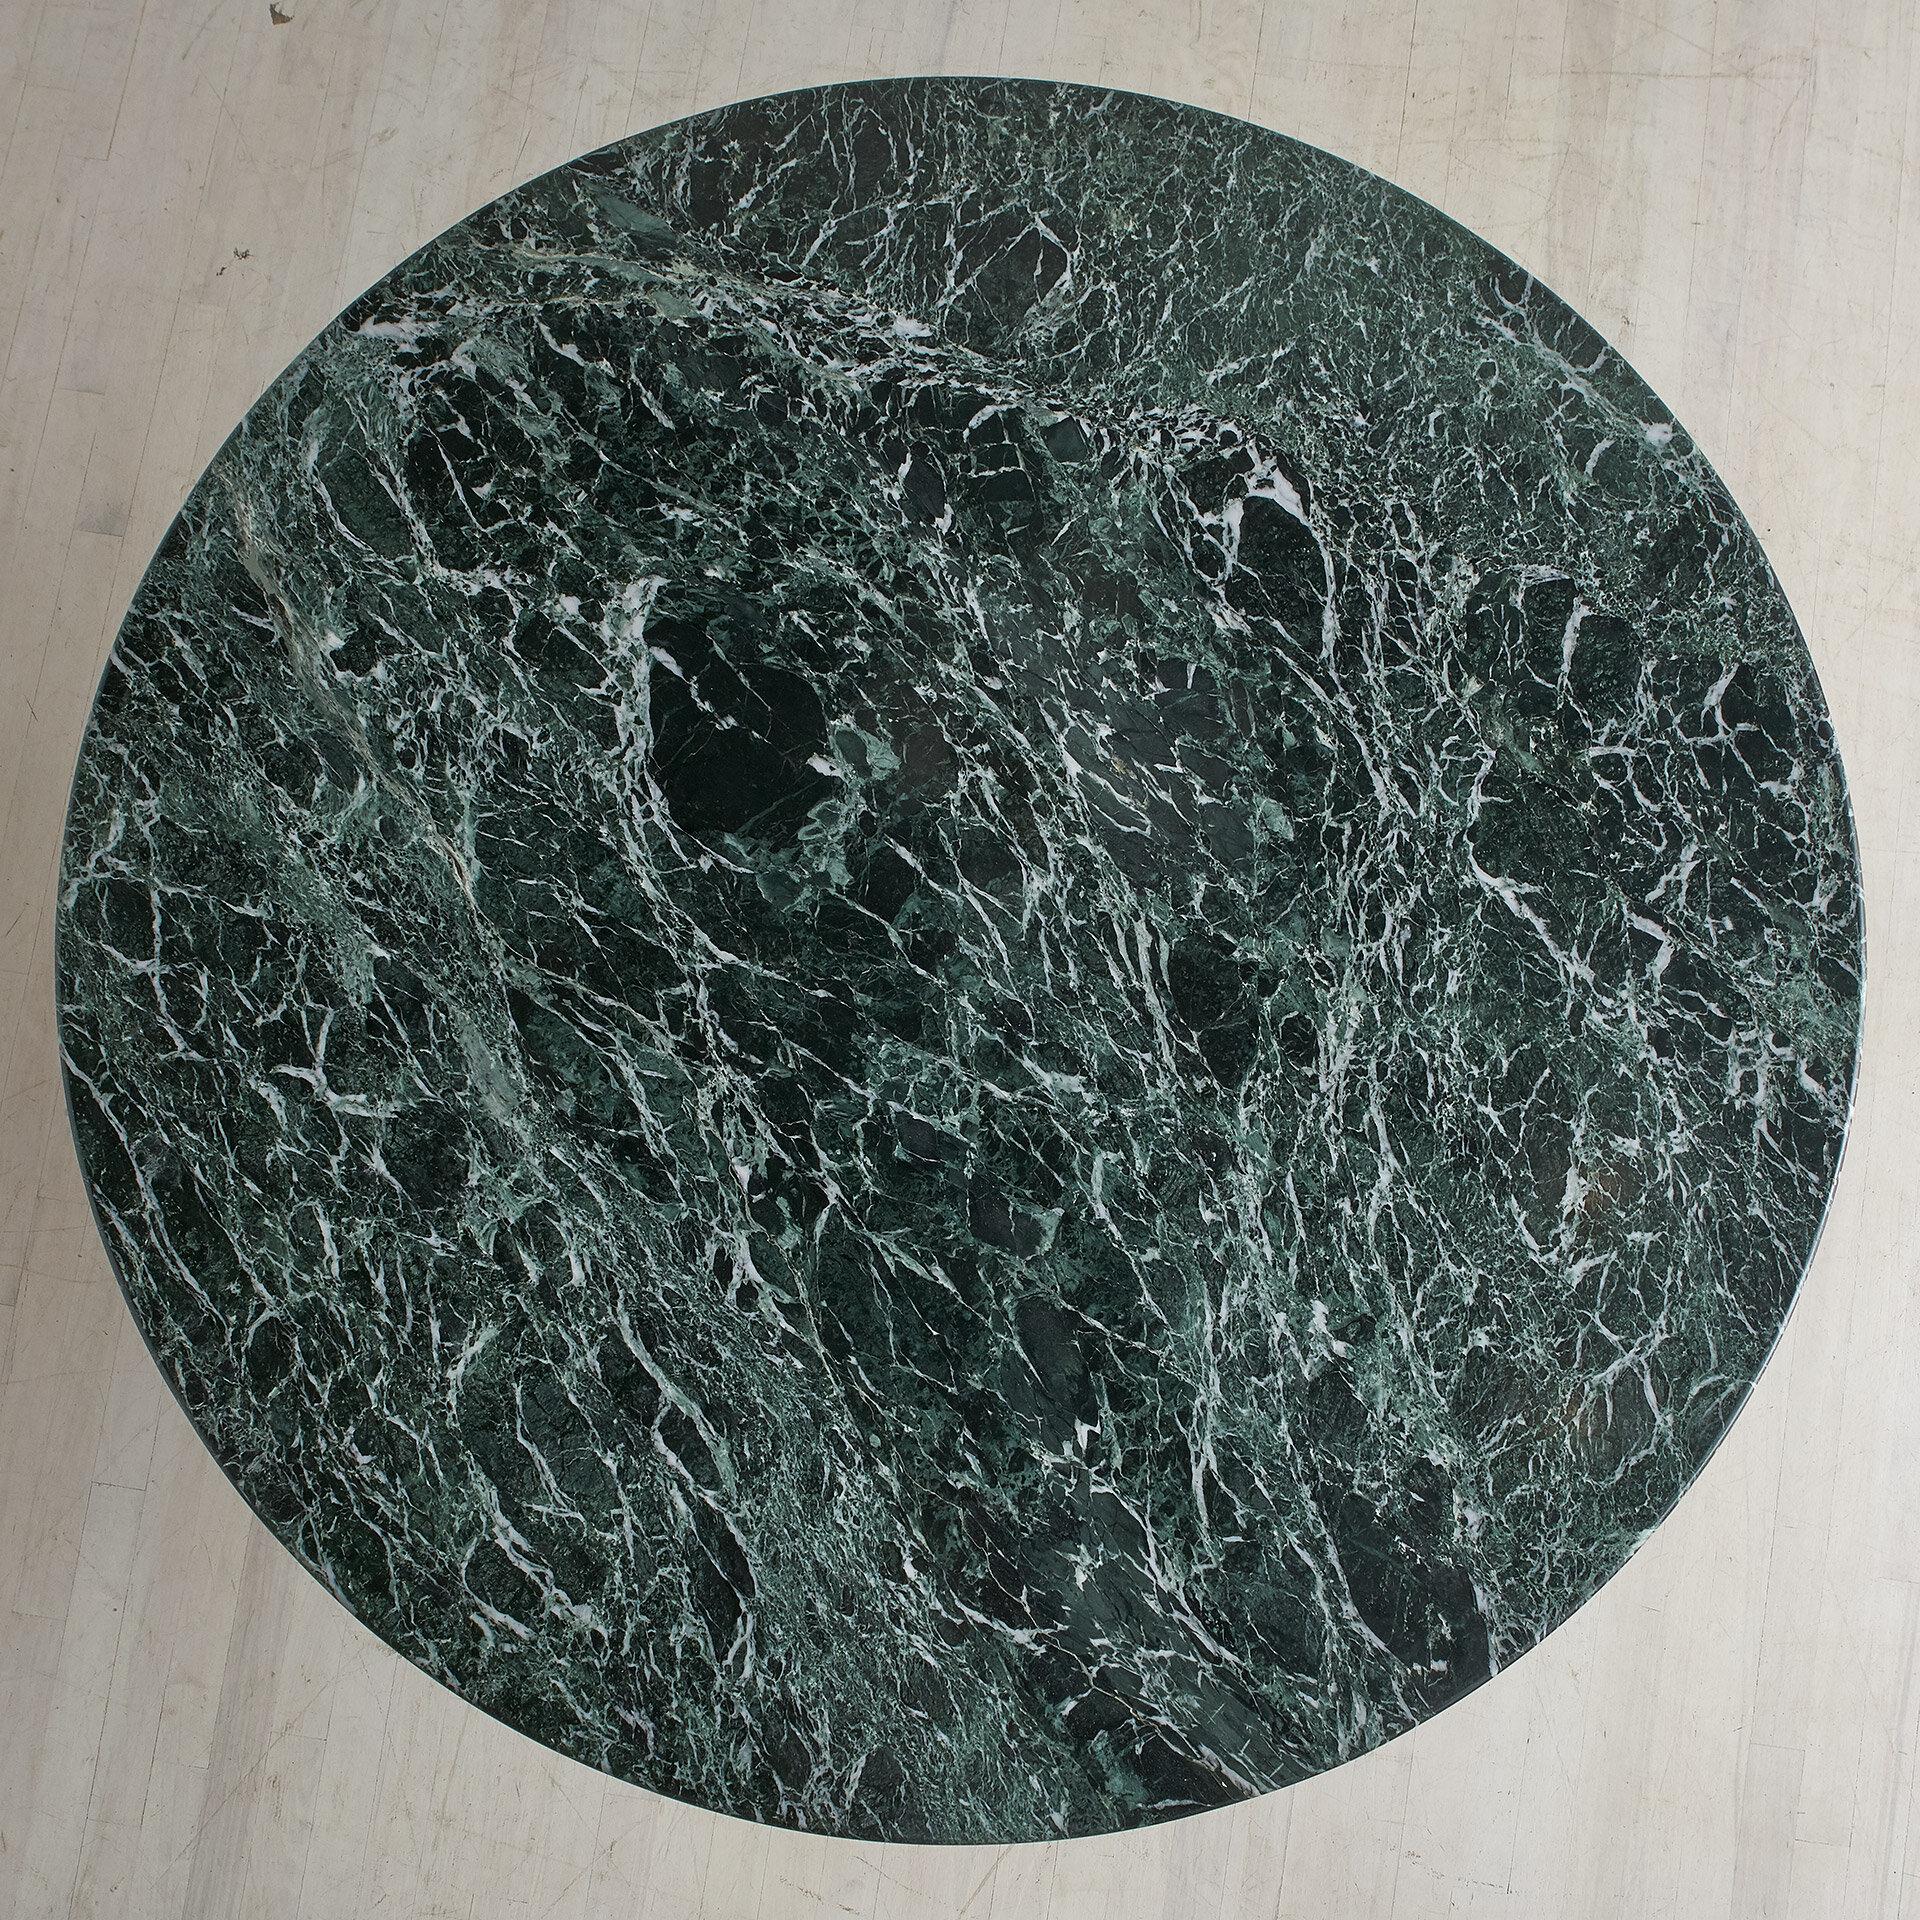 A stunning custom made vintage Green Marble dining table. This table features a dramatically large round base comprised of many vertical pieces of green marble mounted on a wooden base. The table features a honed finish.
 

DIMENSIONS: 52”D x